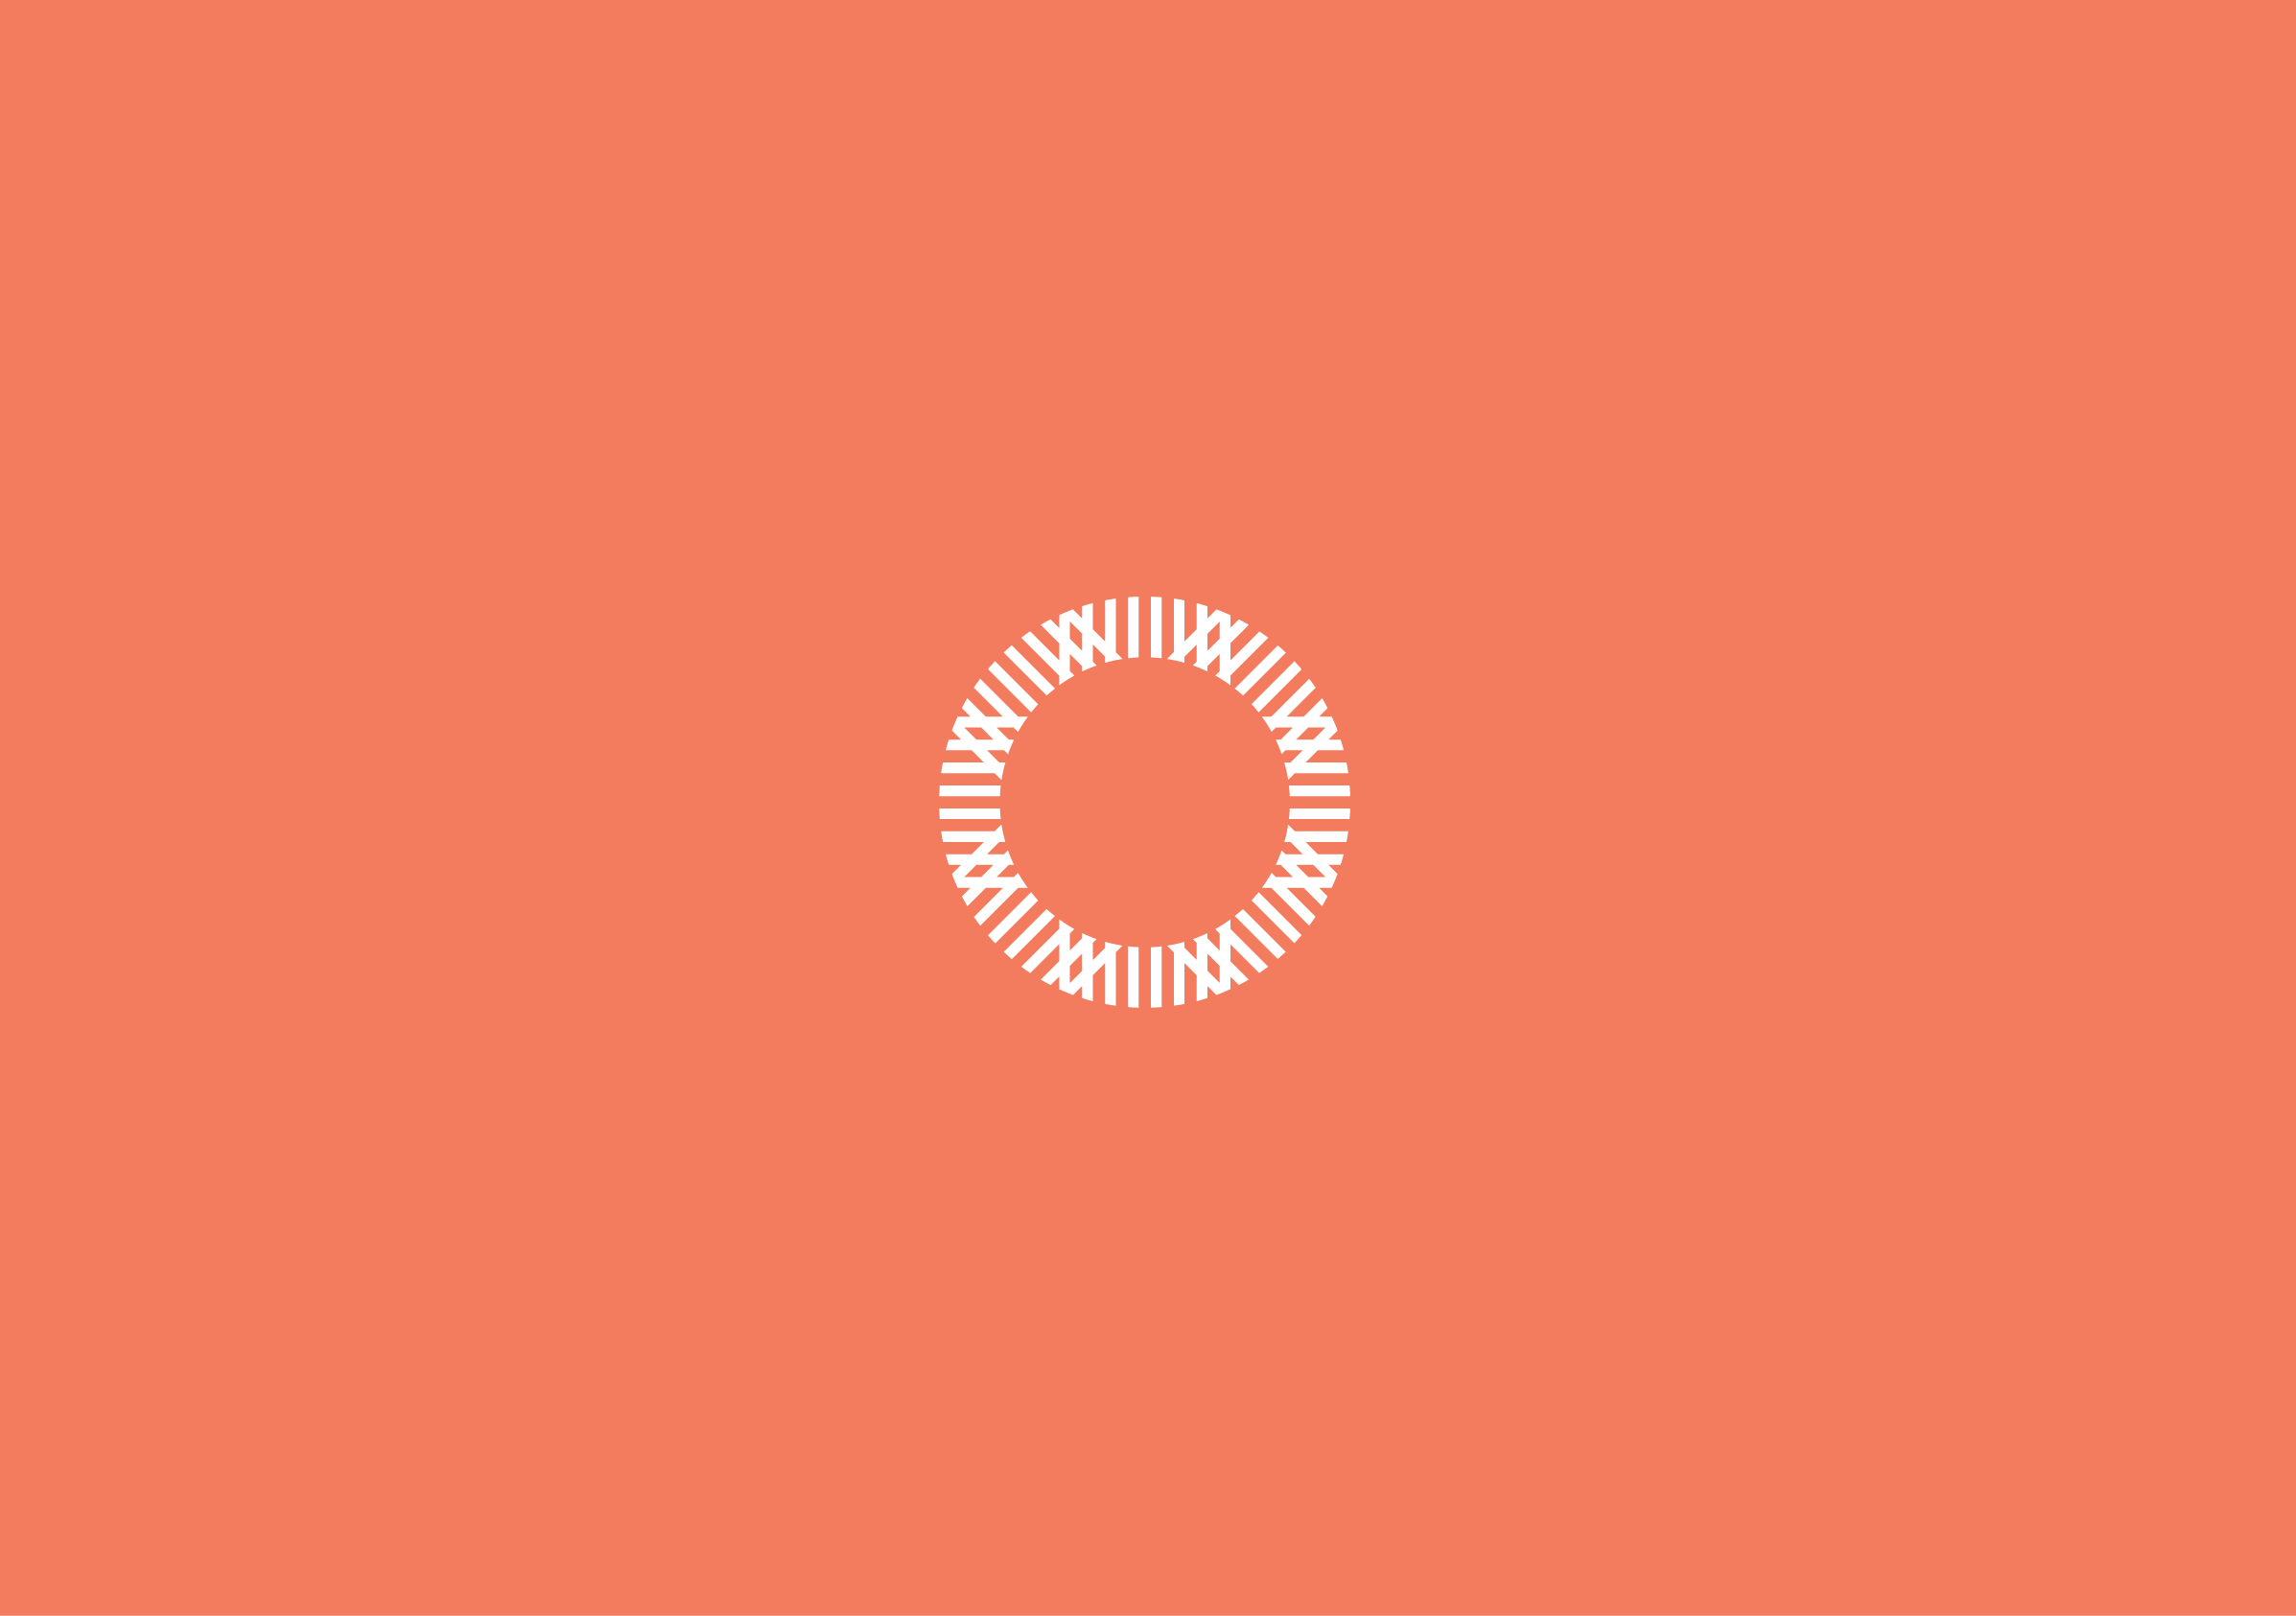 Symbol for A Joyful Thing, a well-being company by Ottawa Graphic Design Studio idApostle